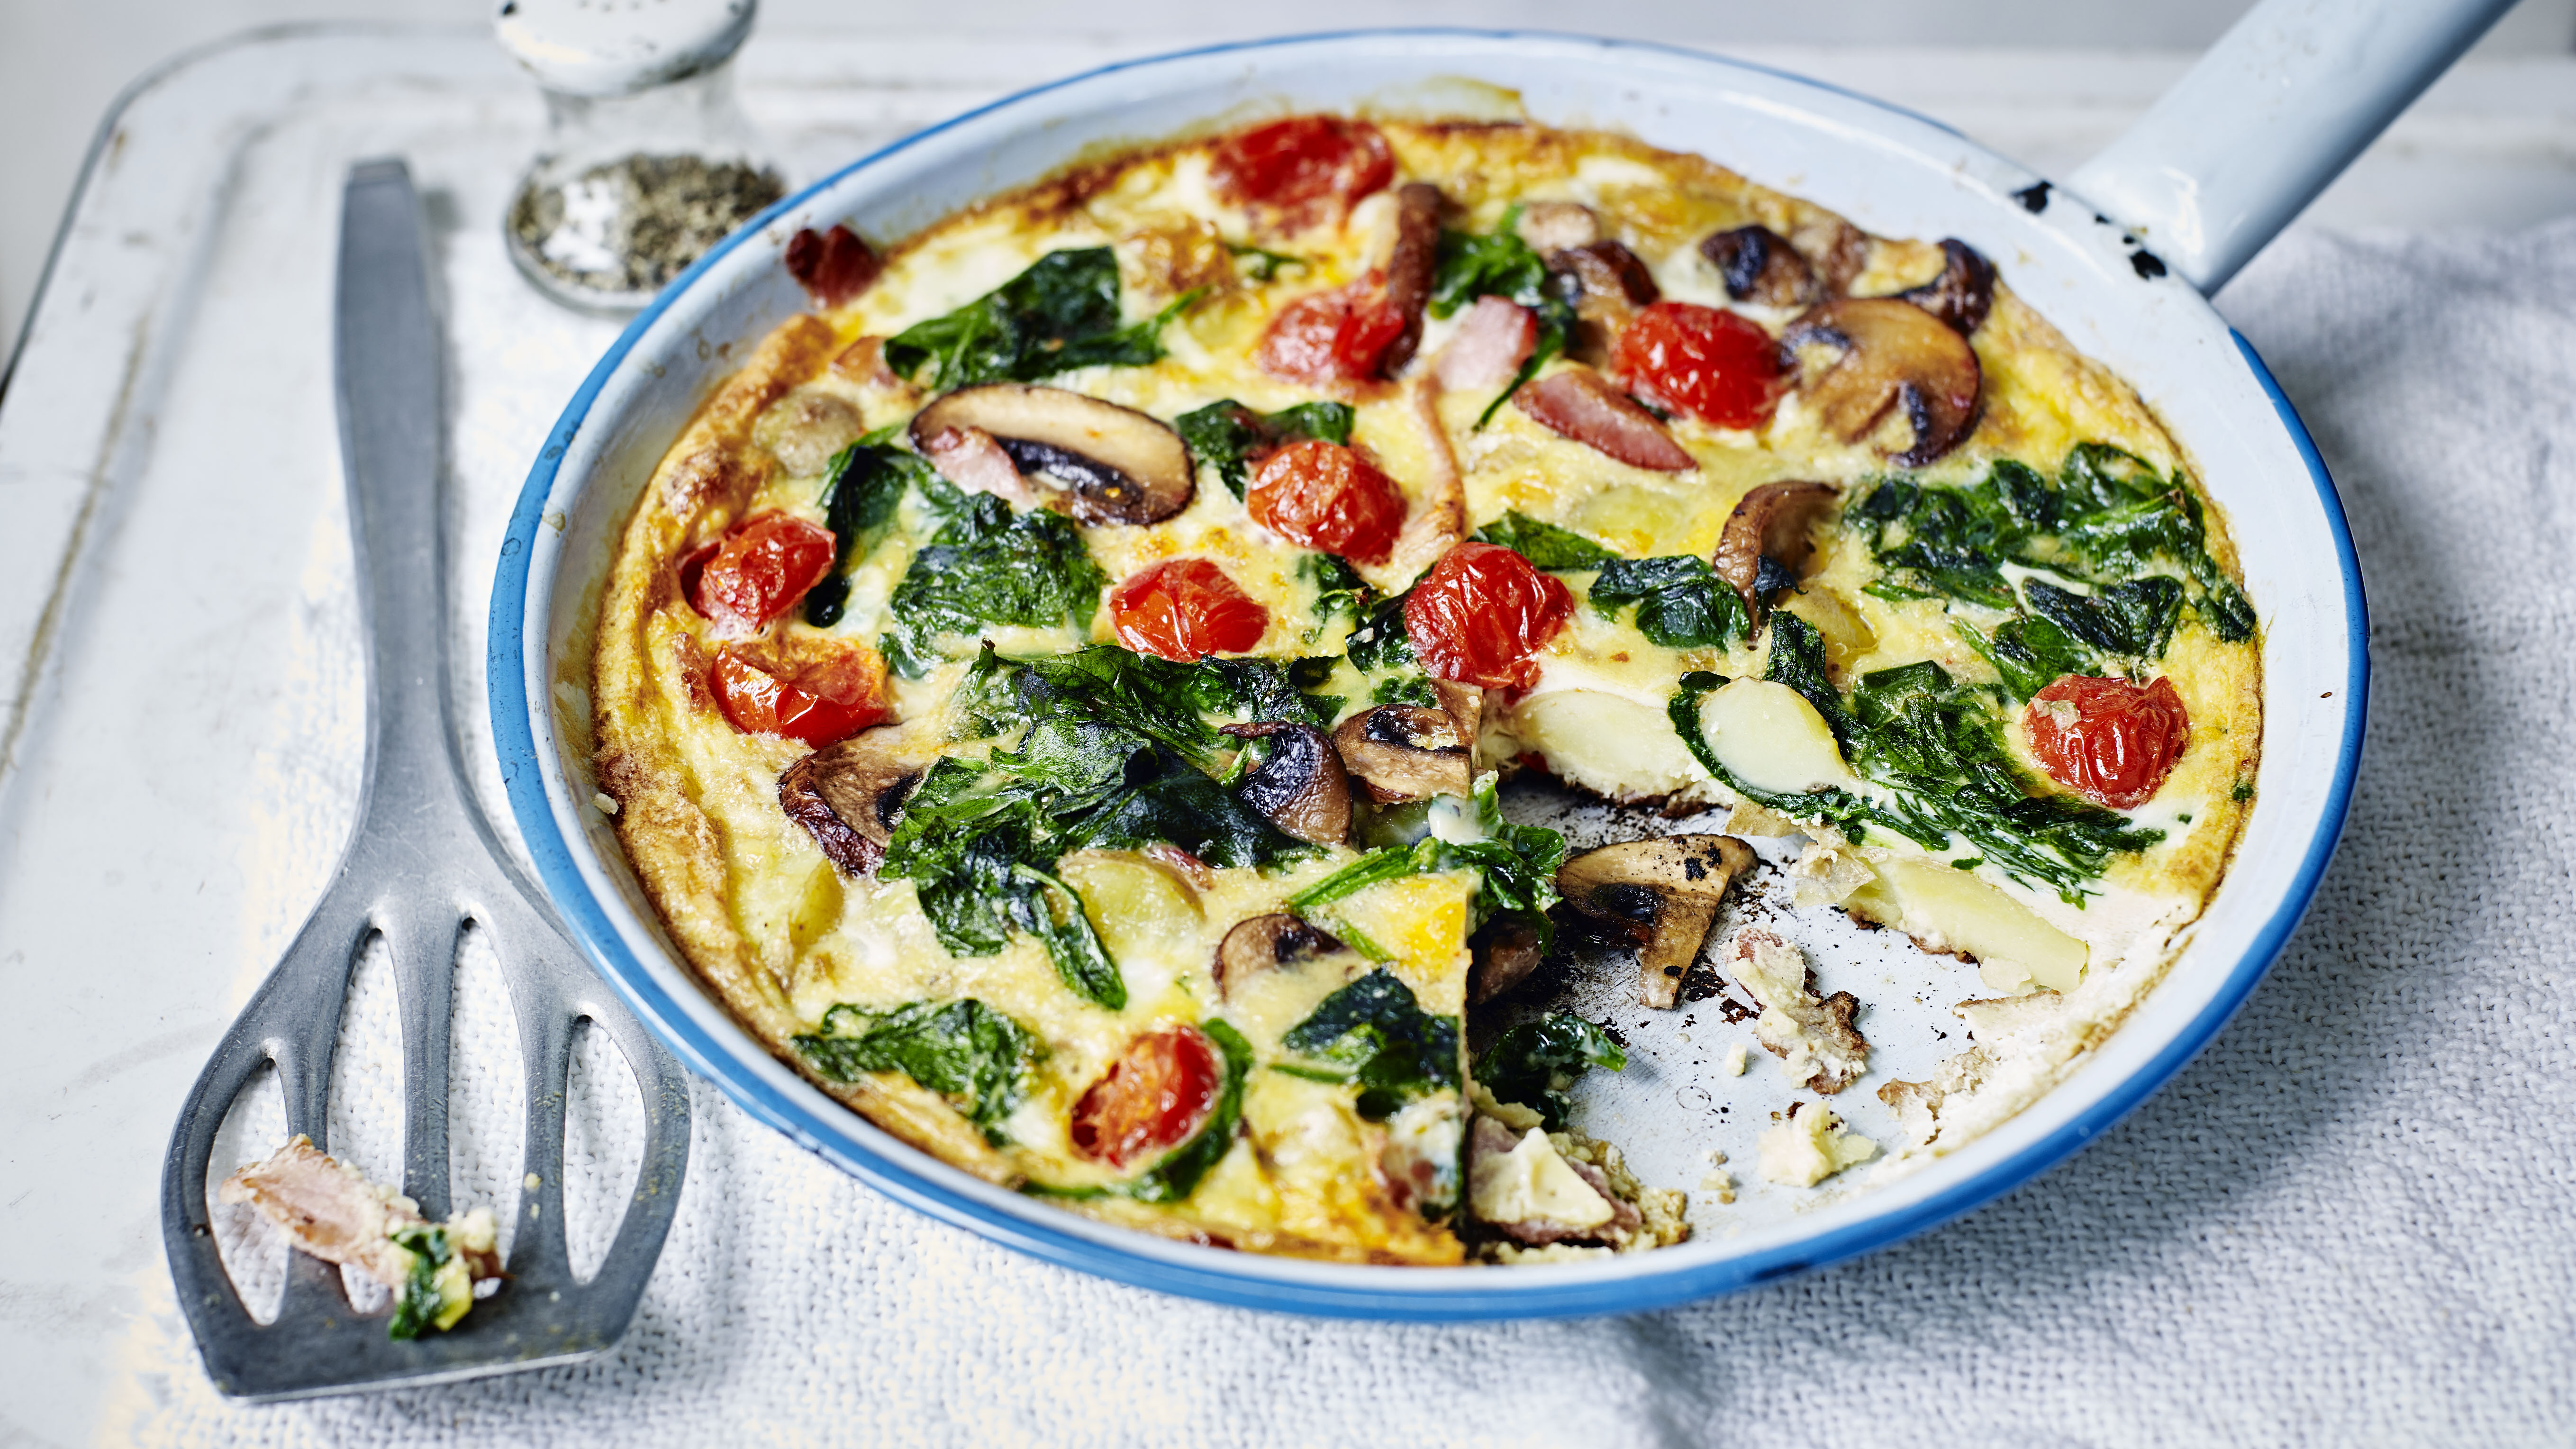 https://food-images.files.bbci.co.uk/food/recipes/all-day_breakfast_12416_16x9.jpg